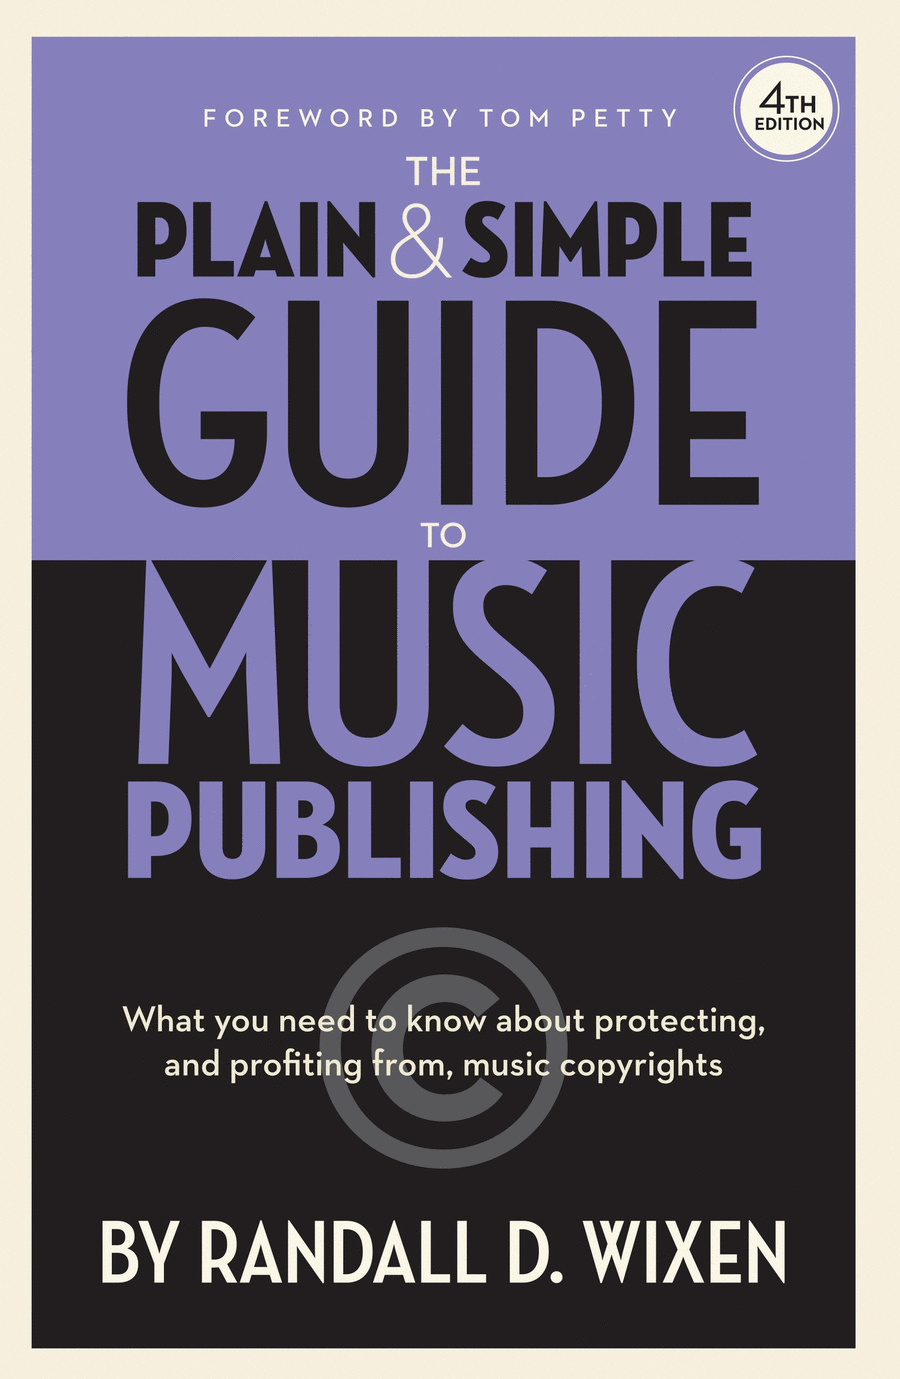 The Plain and Simple Guide to Music Publishing - 4th Edition